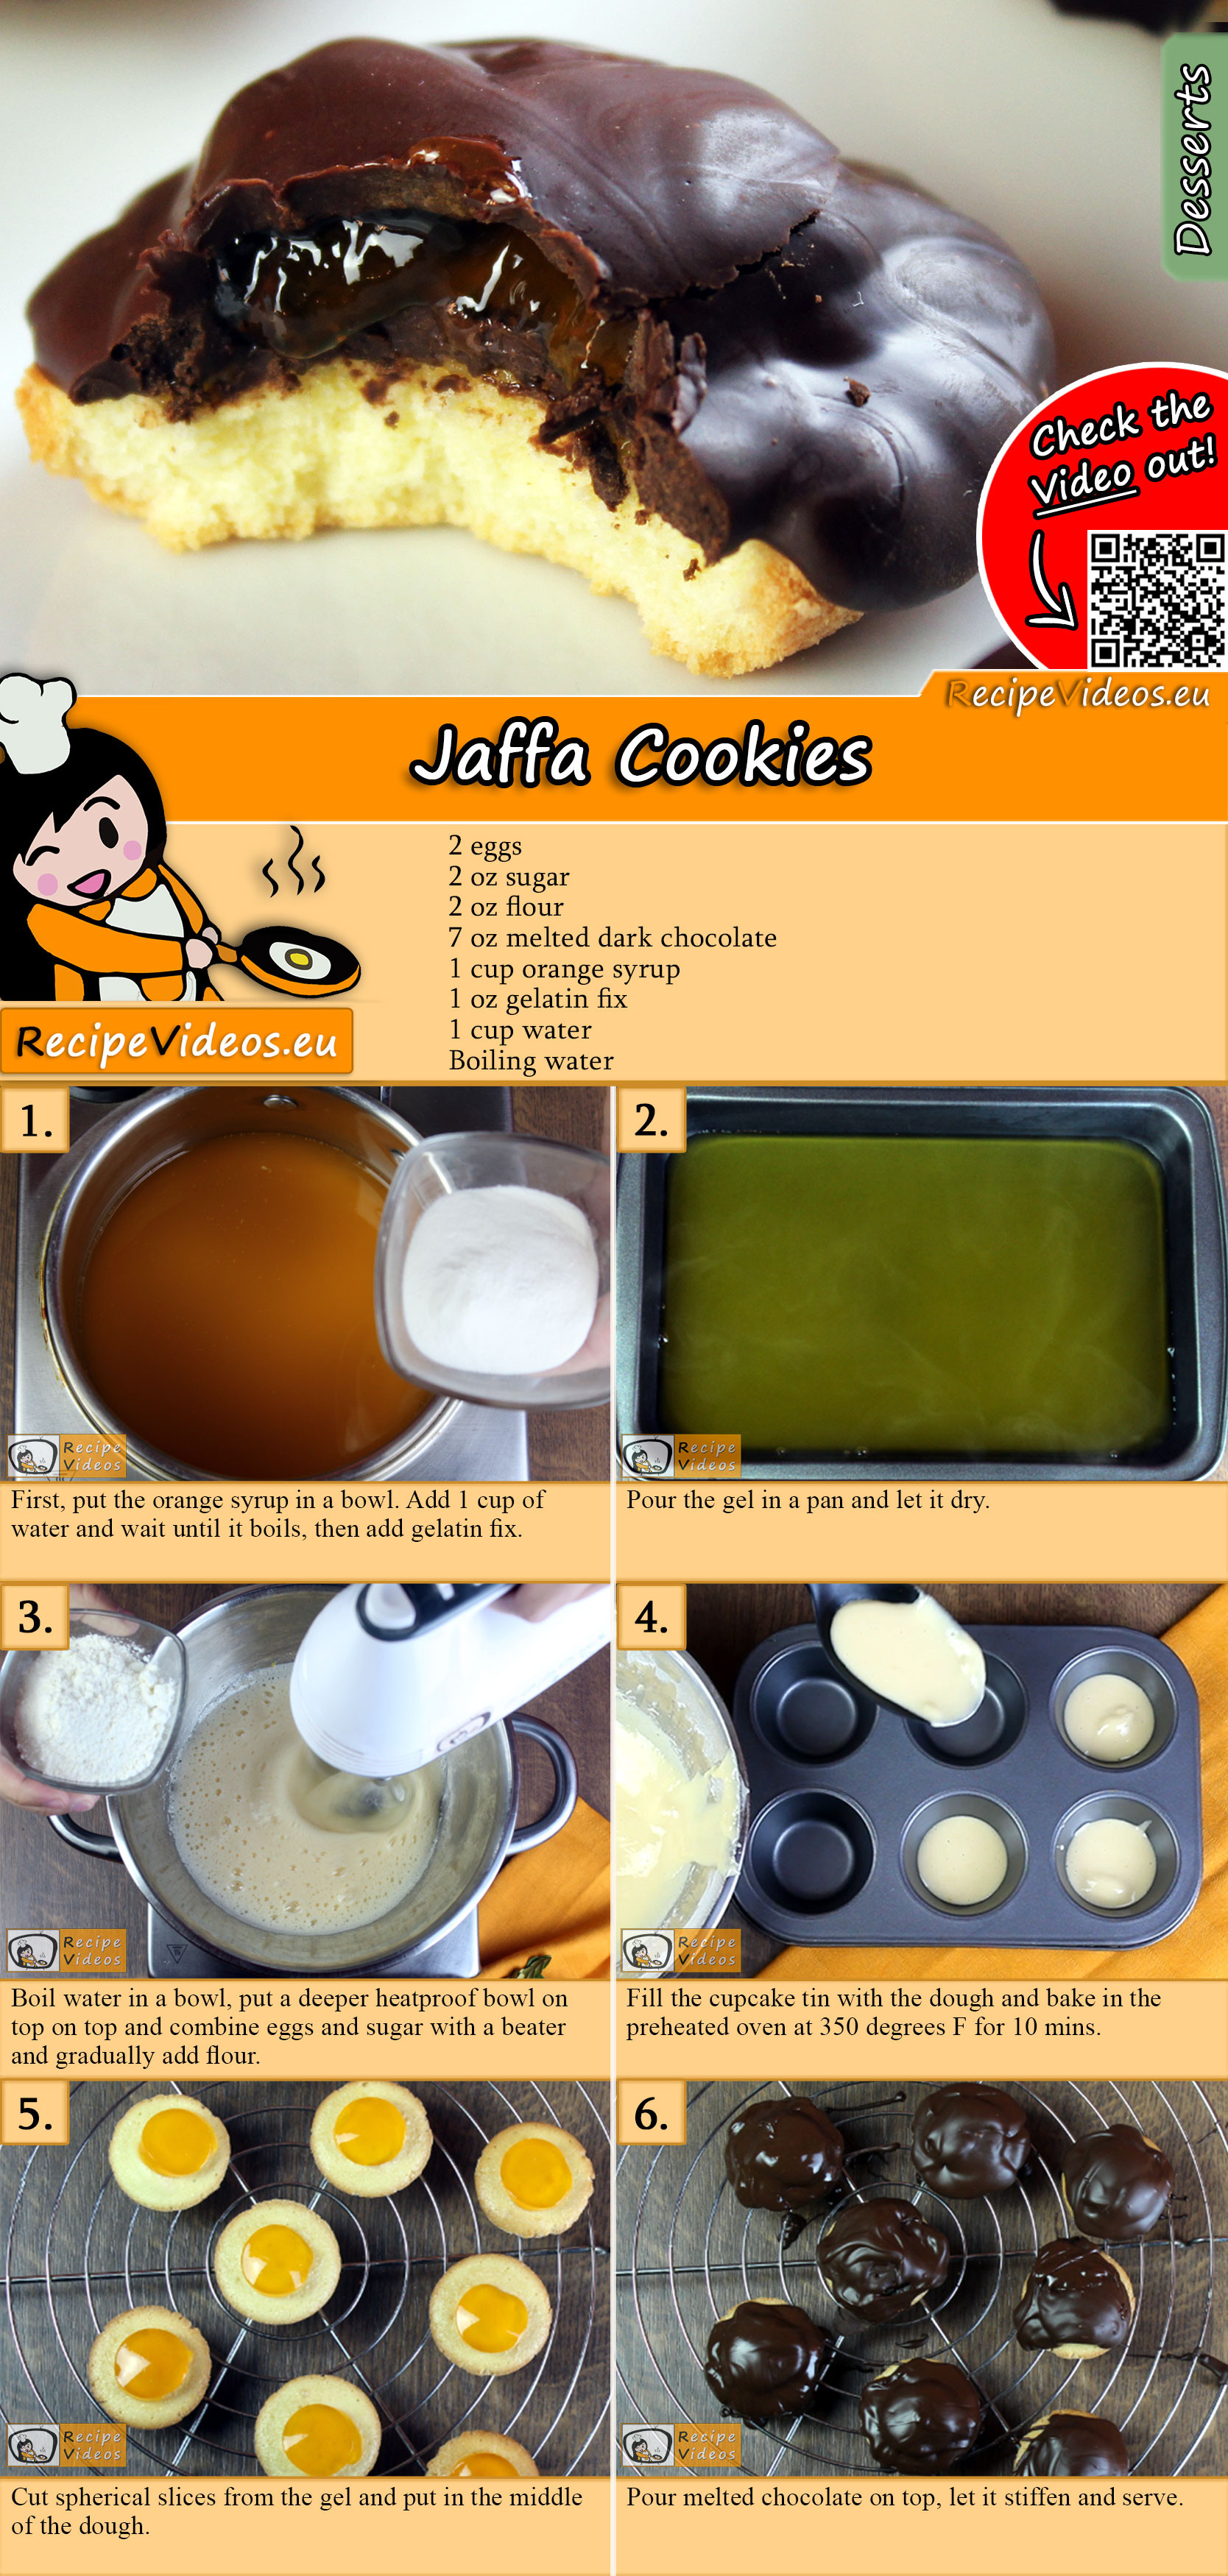 Jaffa Cookies recipe with video